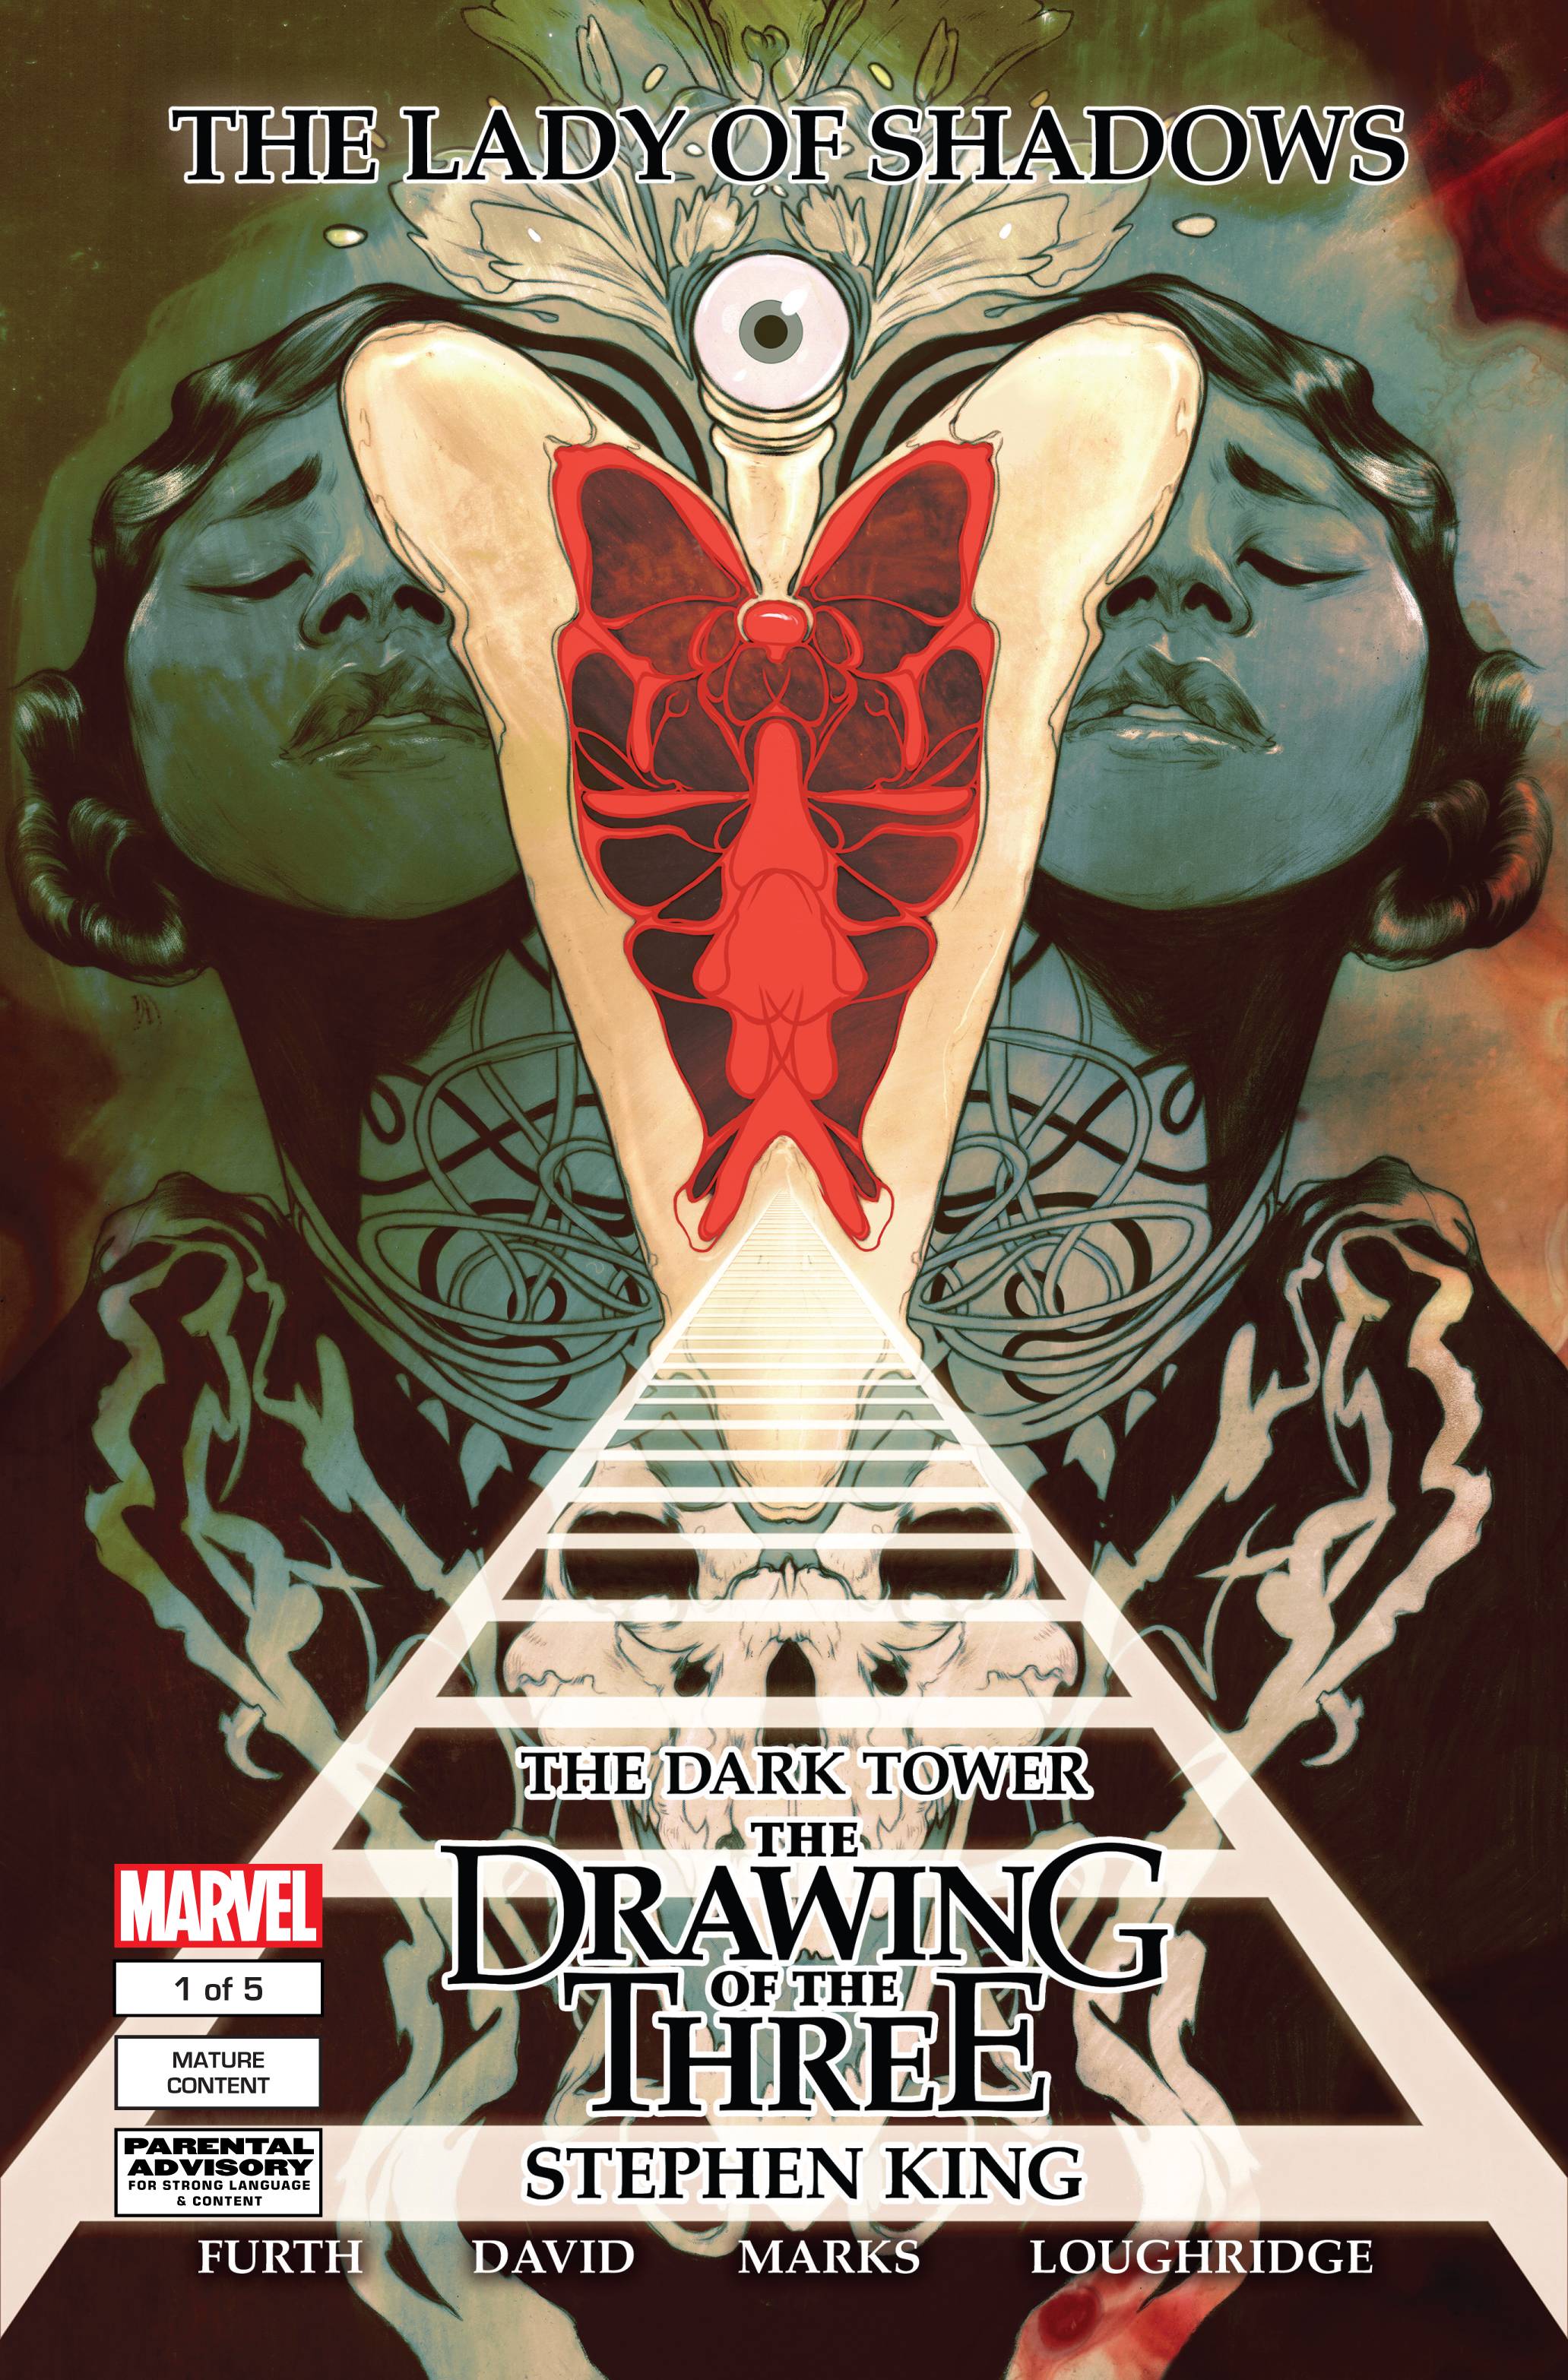 Dark Tower The Drawing of the Three - Lady of Shadows #1 (2015)